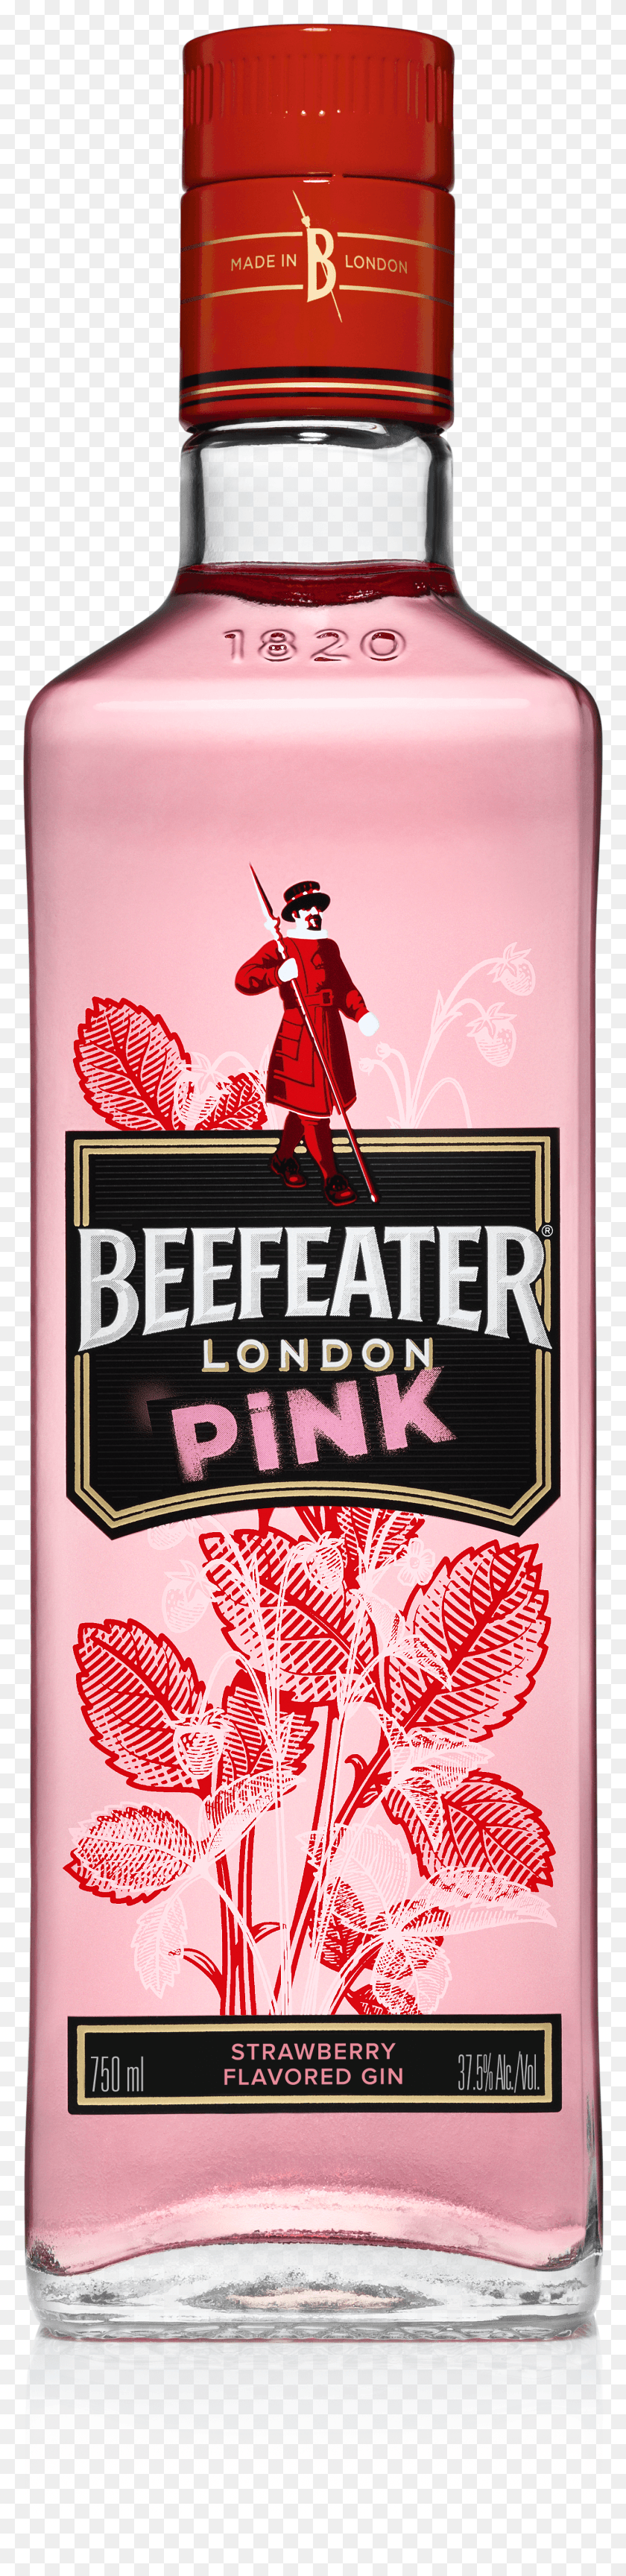 1432x6237 Descargar Png Beefeater Pink Gin Beefeater Rosa Png